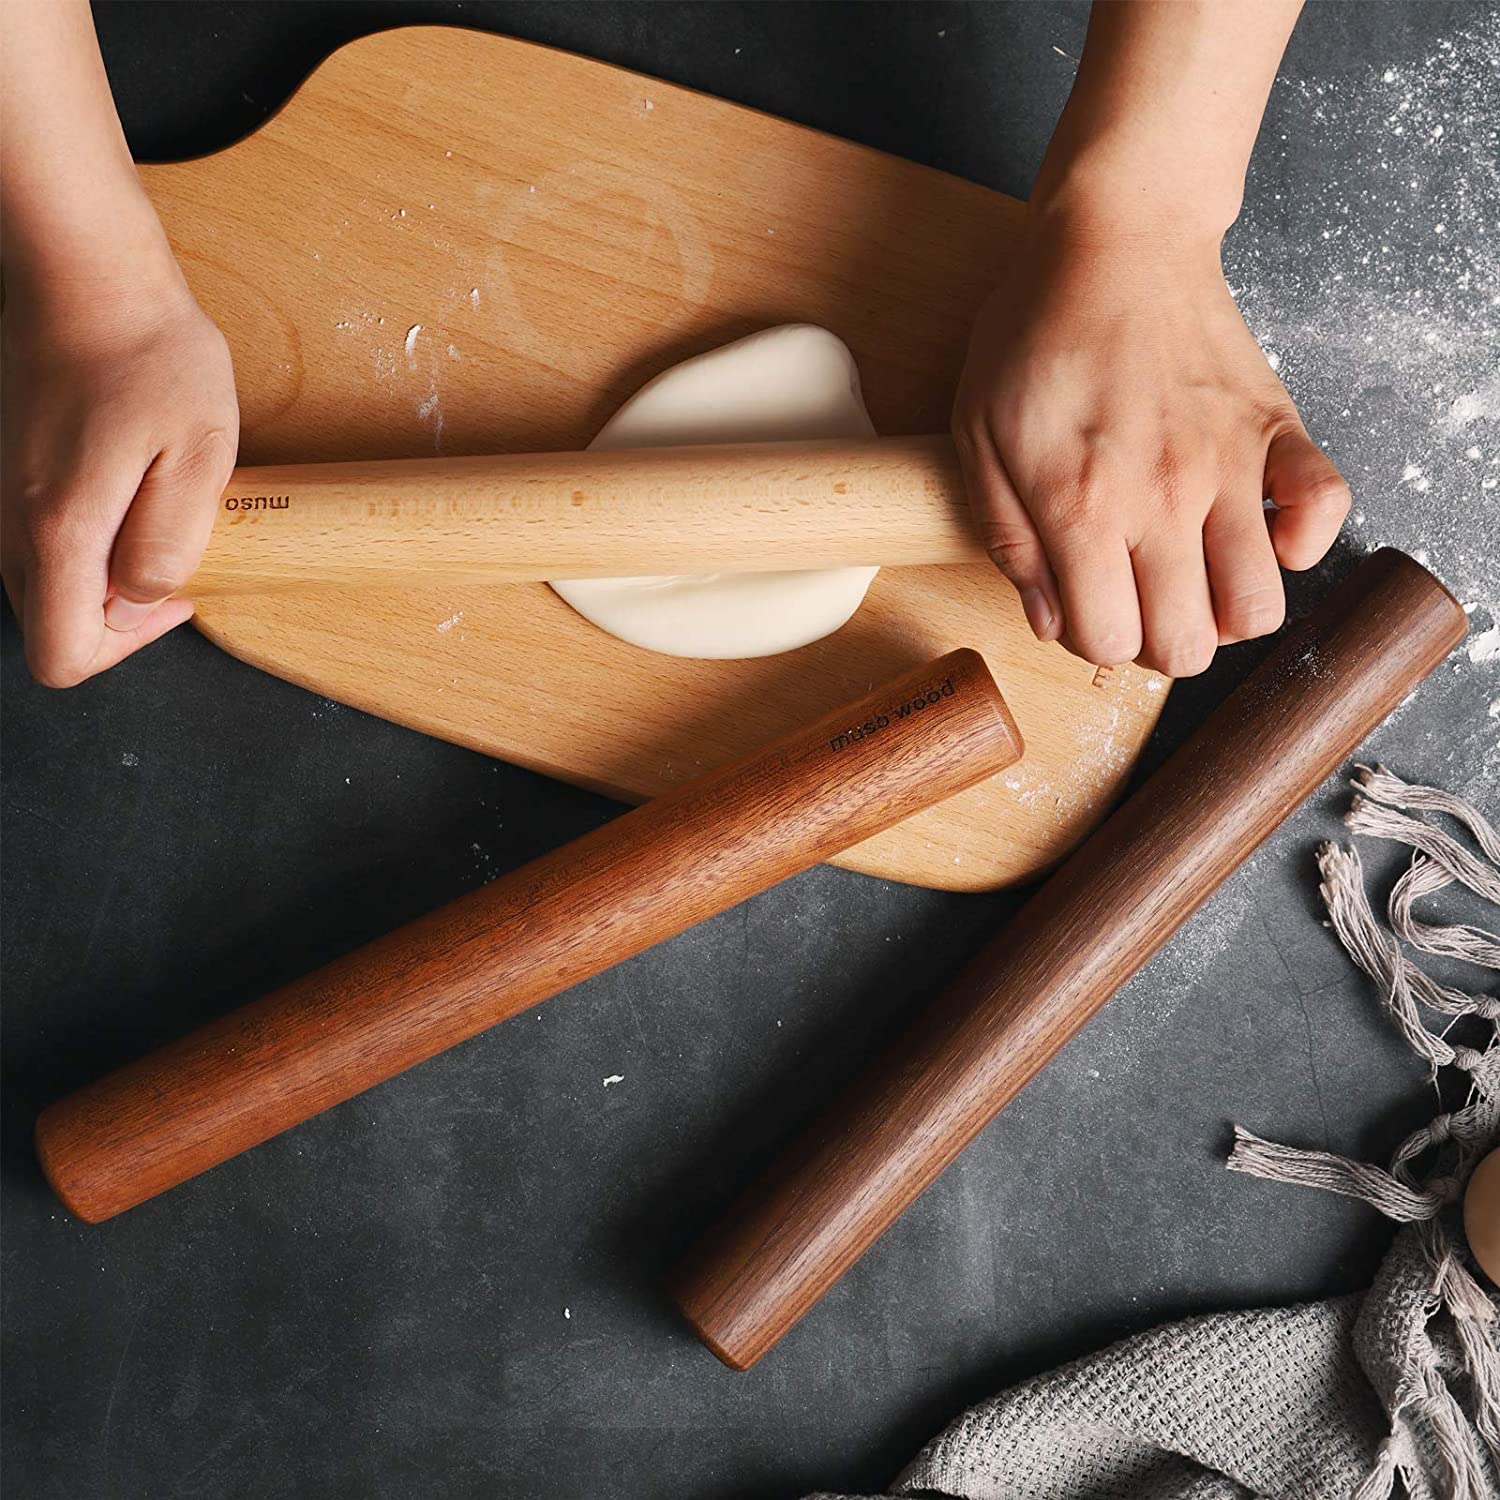 OXO Non-Stick Rolling Pin 